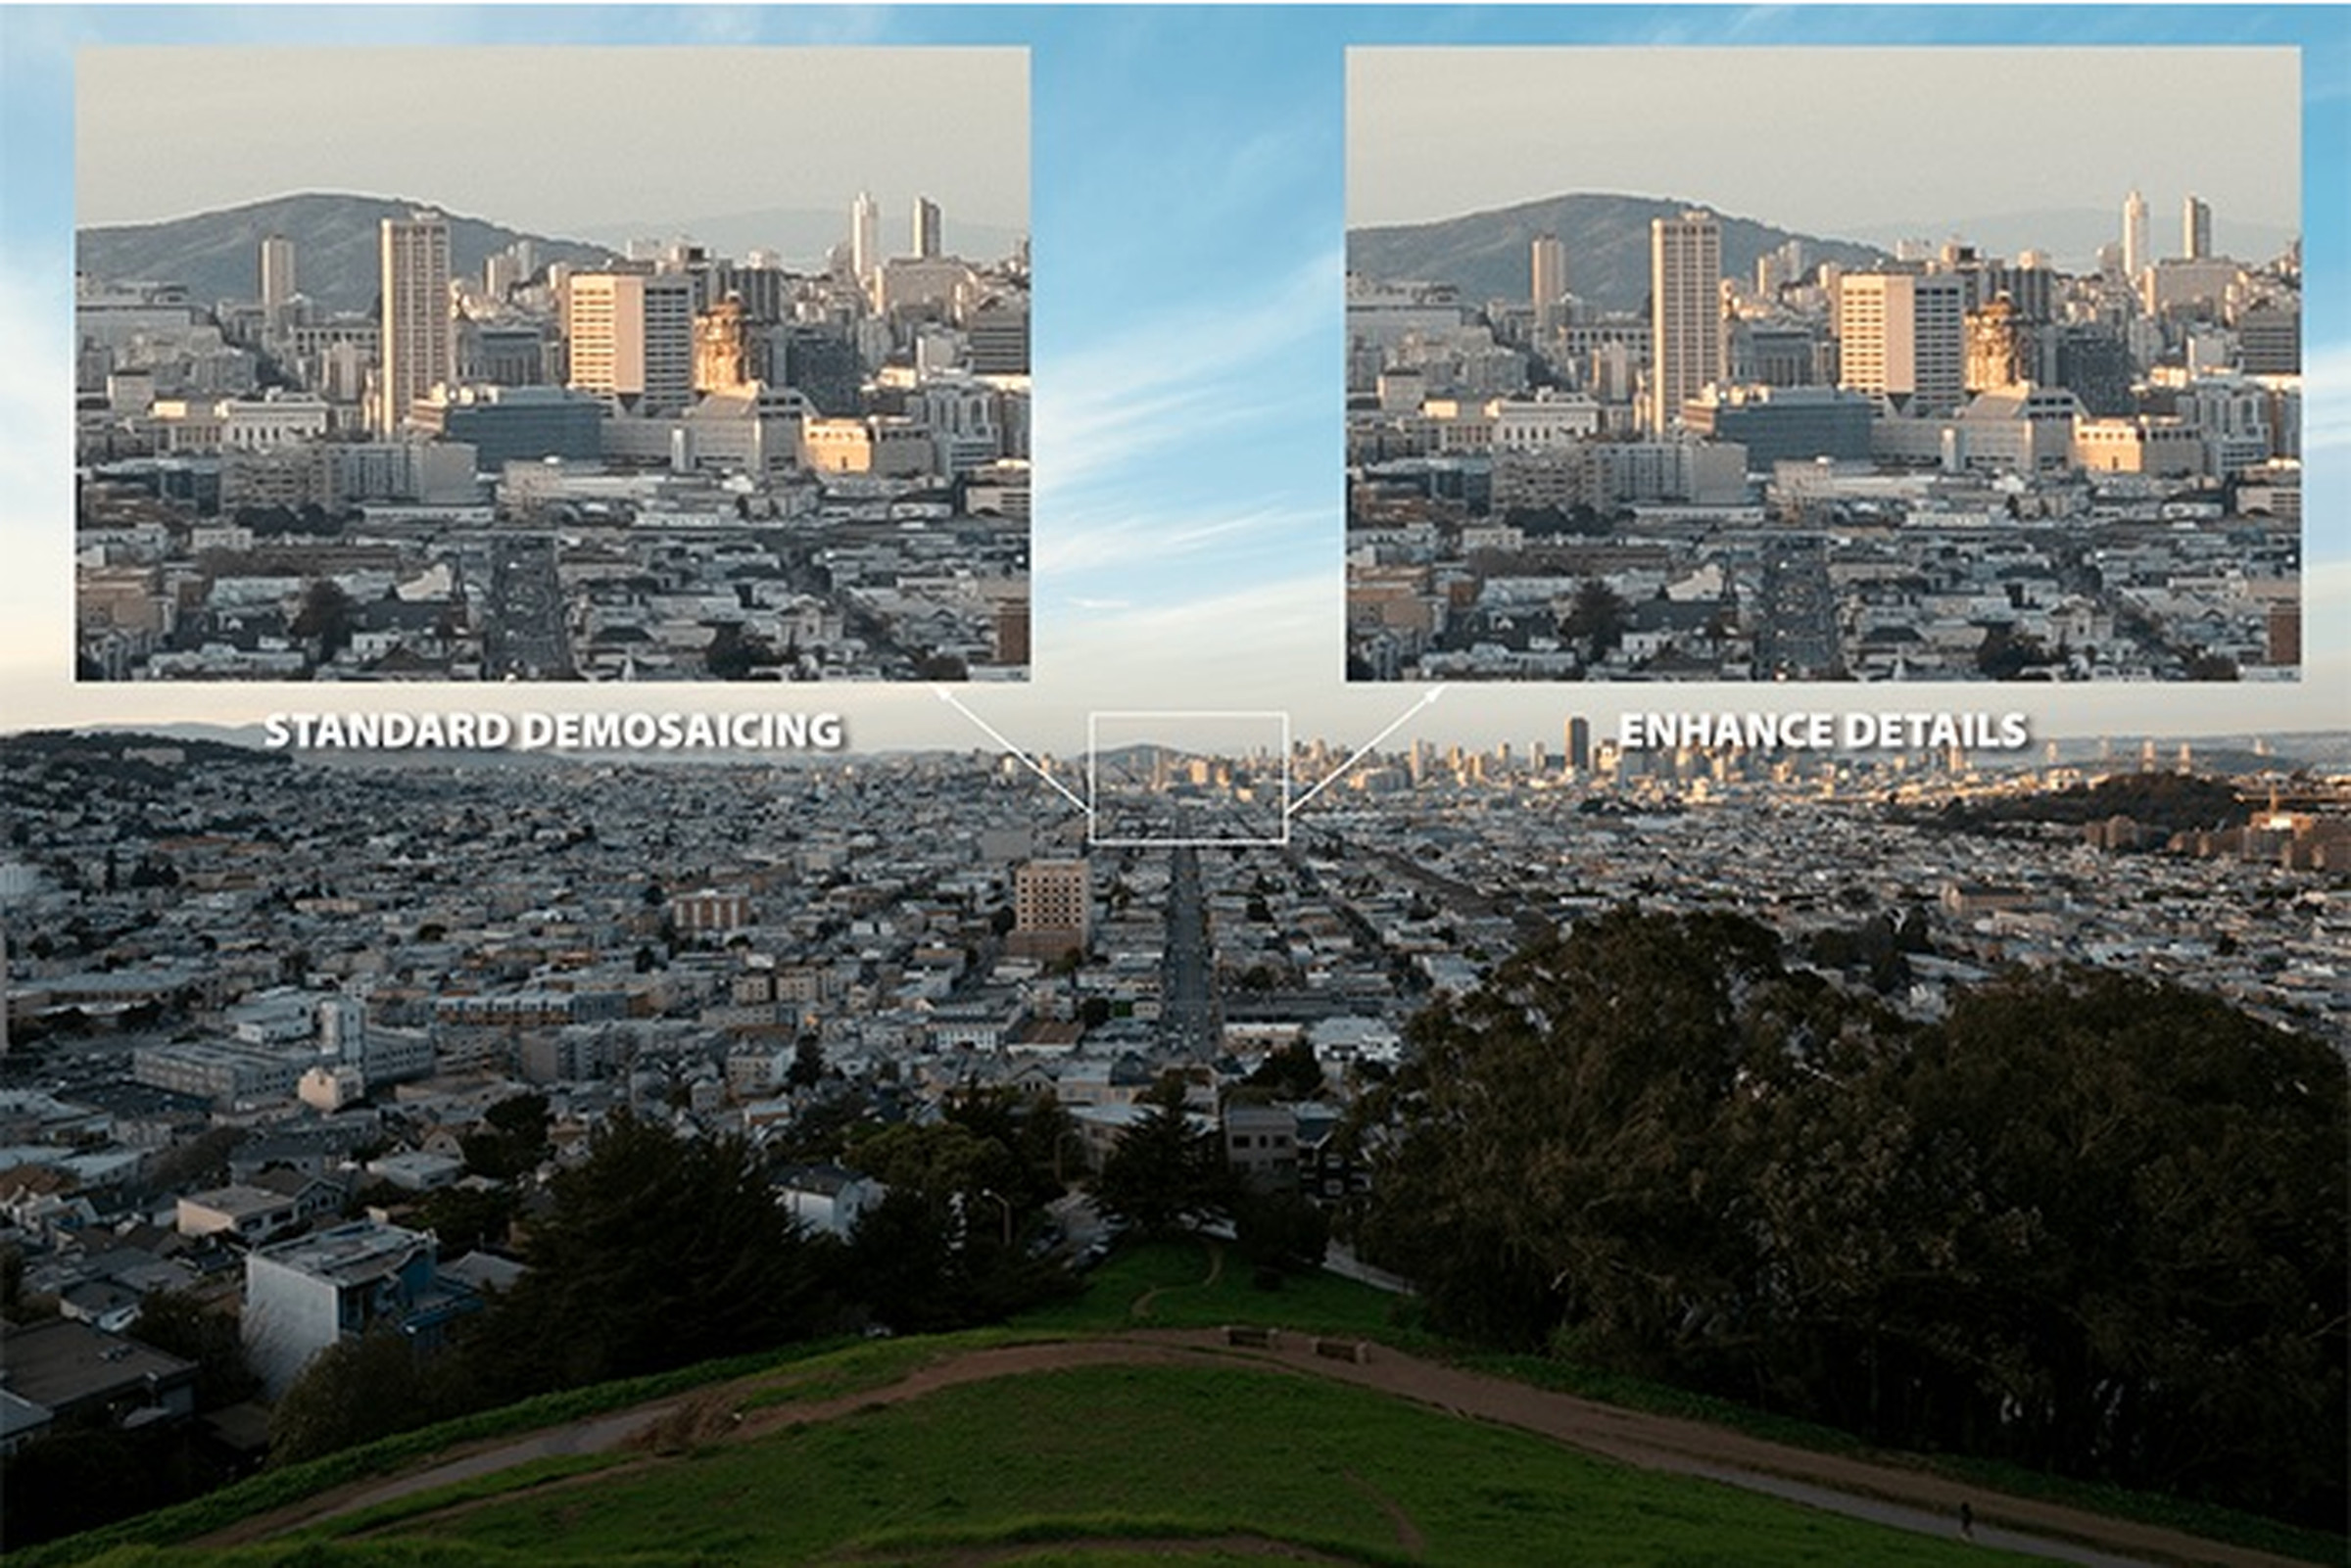 Another comparison of Adobe’s new Enhance Details feature.